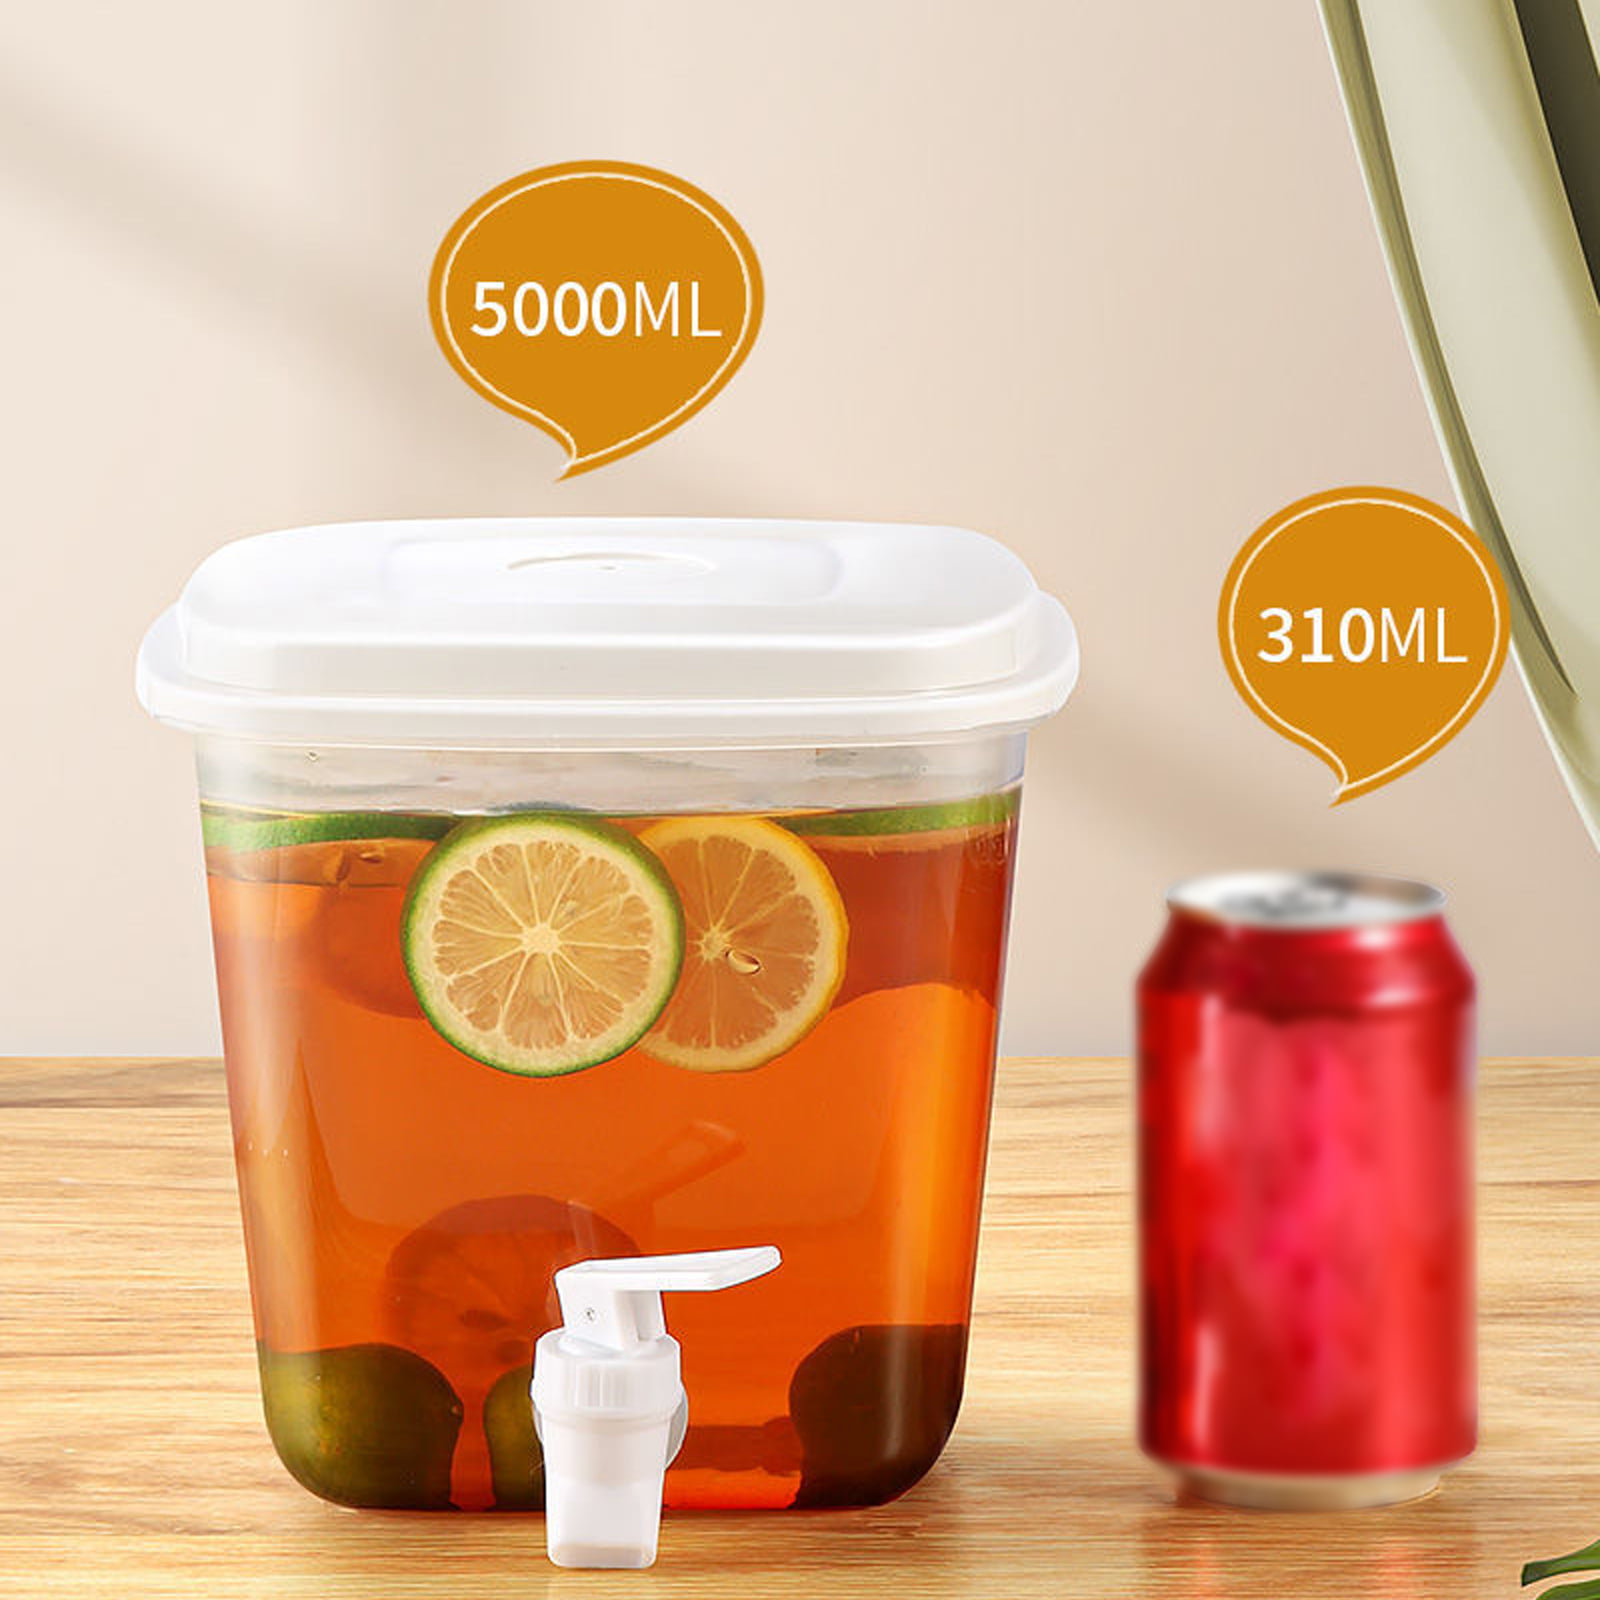 AURIGATE Plastic Drink Dispenser,Beverage Dispenser With Spigot.1.2Gallon  Iced Lemonade Juice Containers With Lids For Fridge Or Parties. Small Water